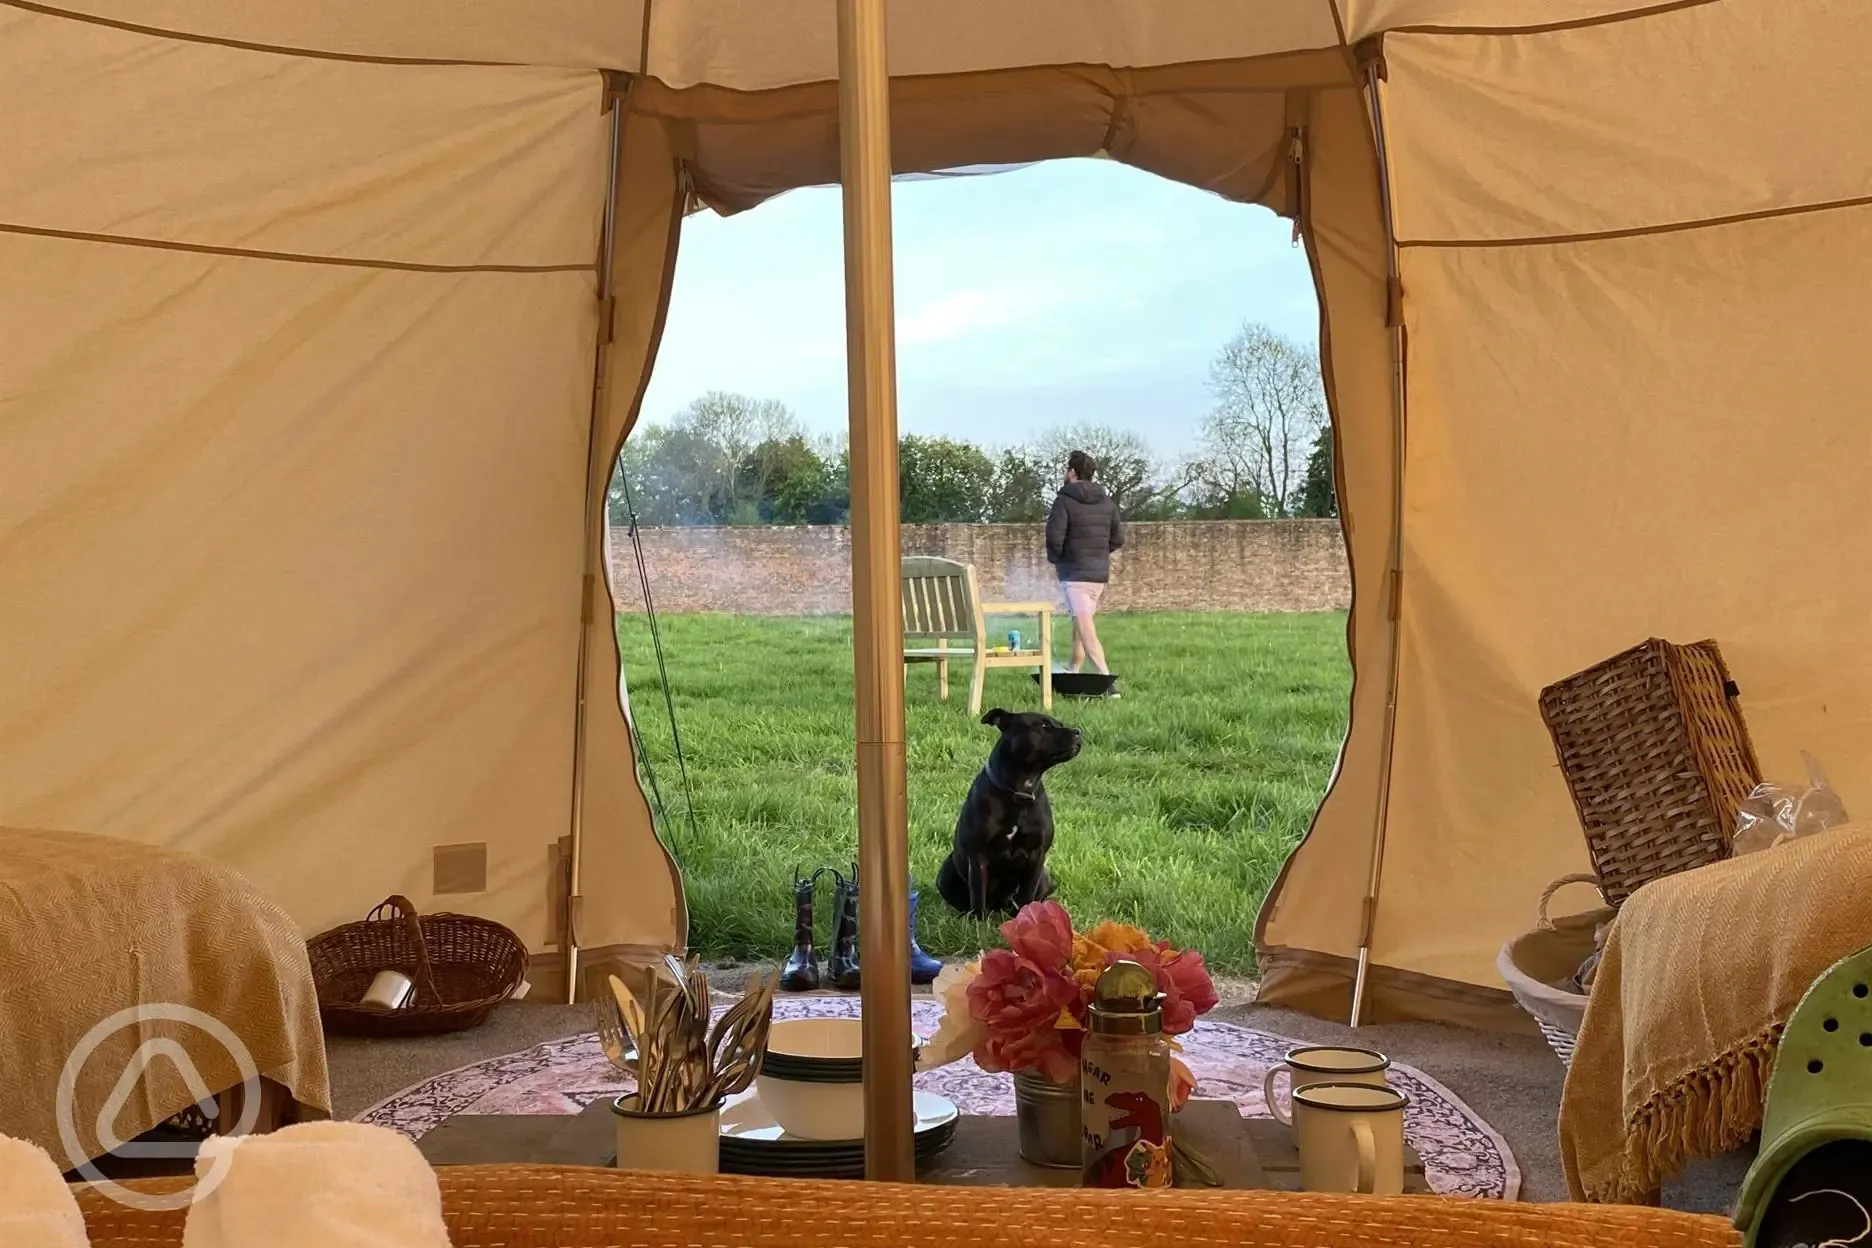 Two tents are dog friendly